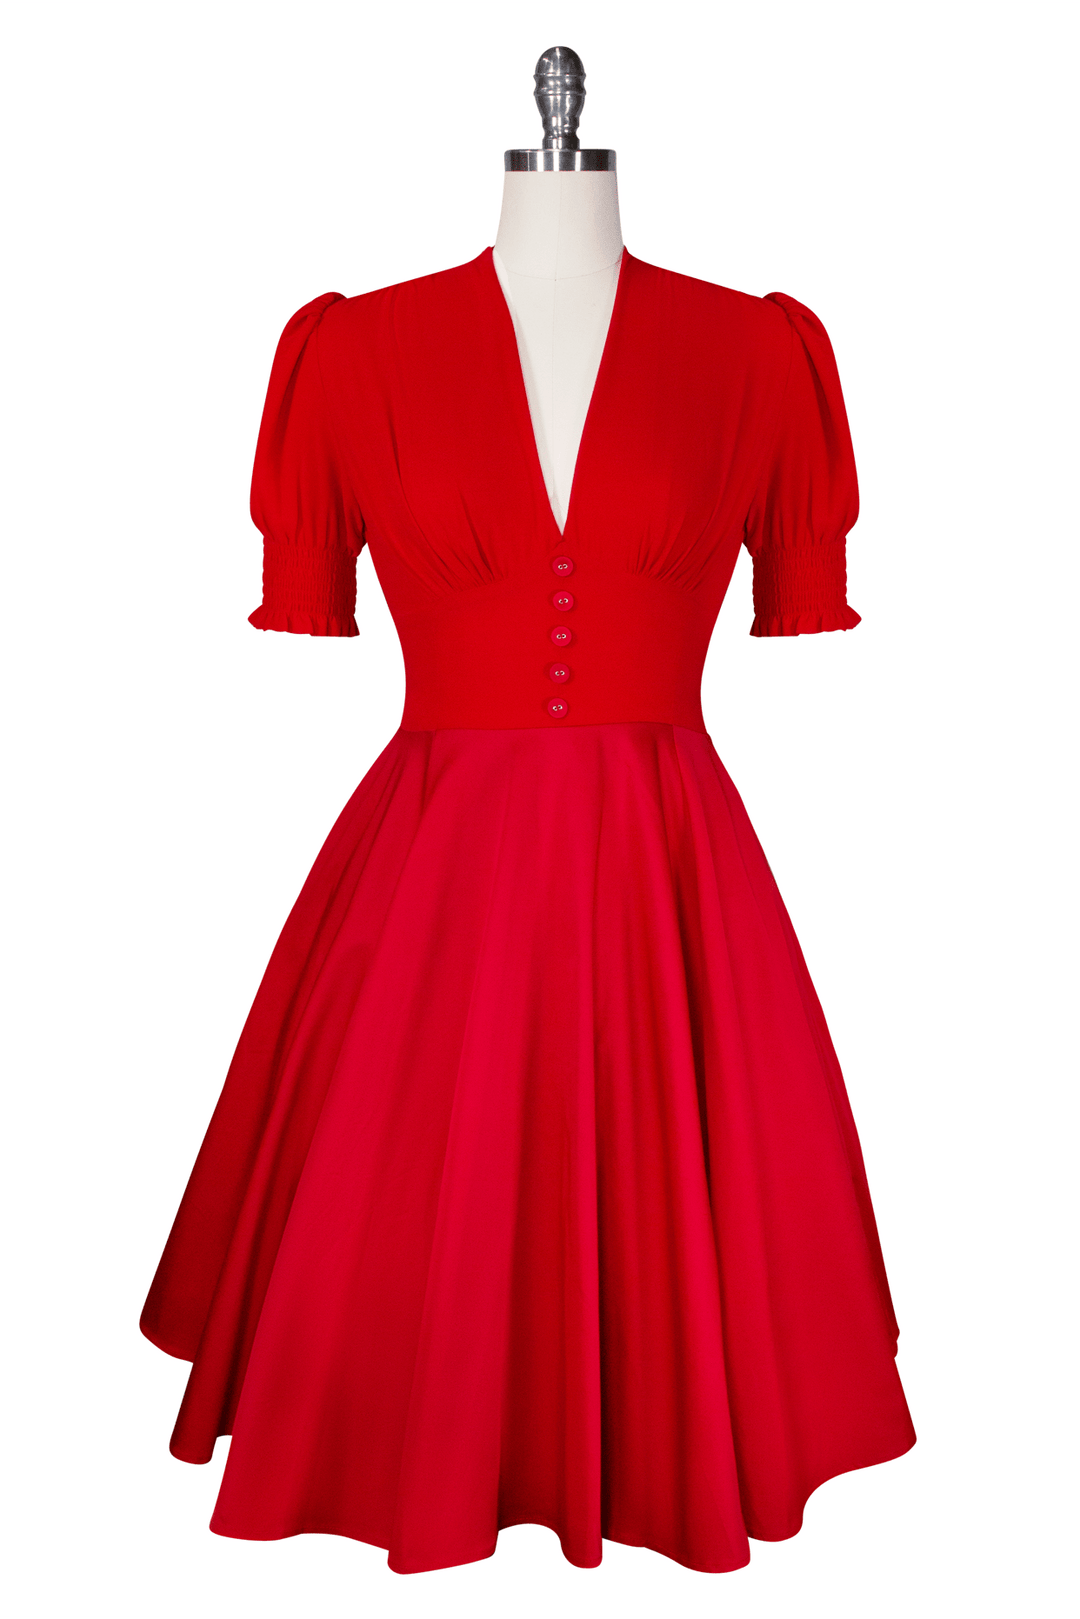 Miss Strawberry Pageant Dress - Kitten D'Amour